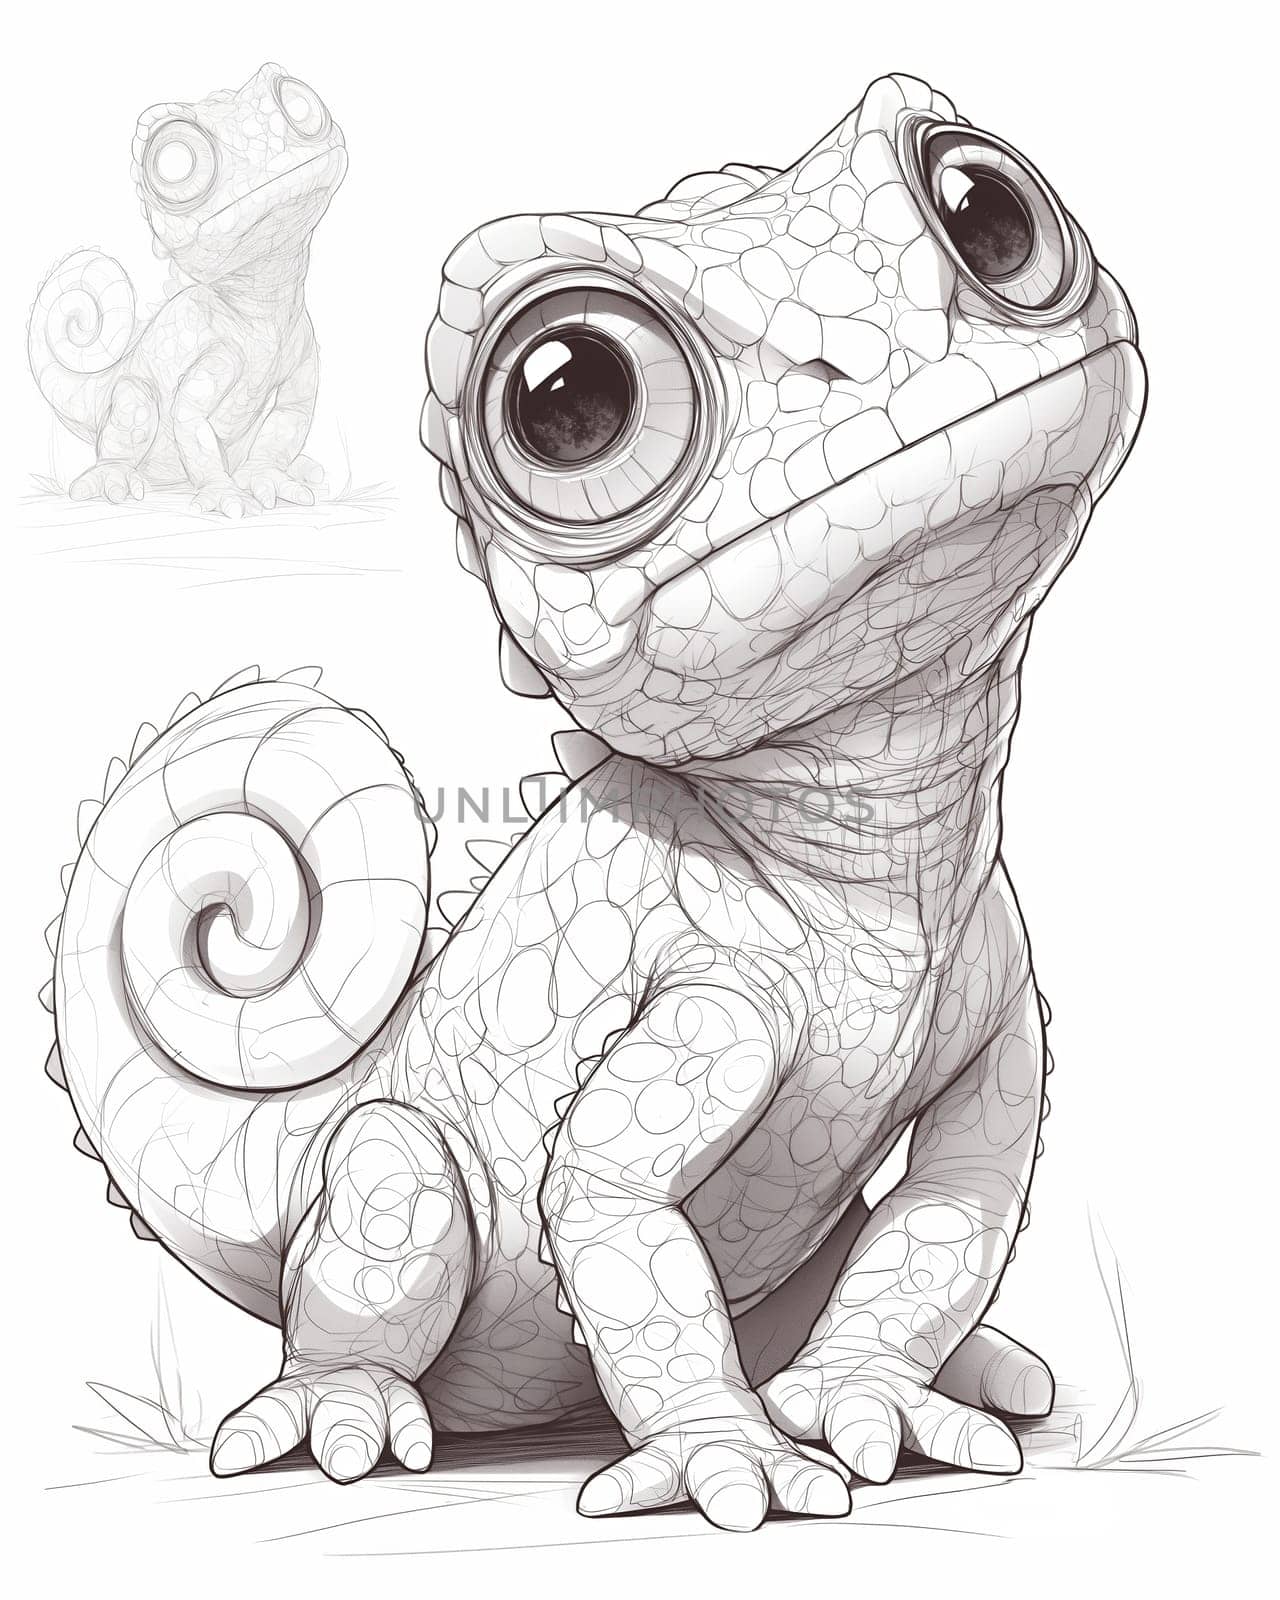 Coloring book for children, coloring animal, chameleon. Selective soft focus.